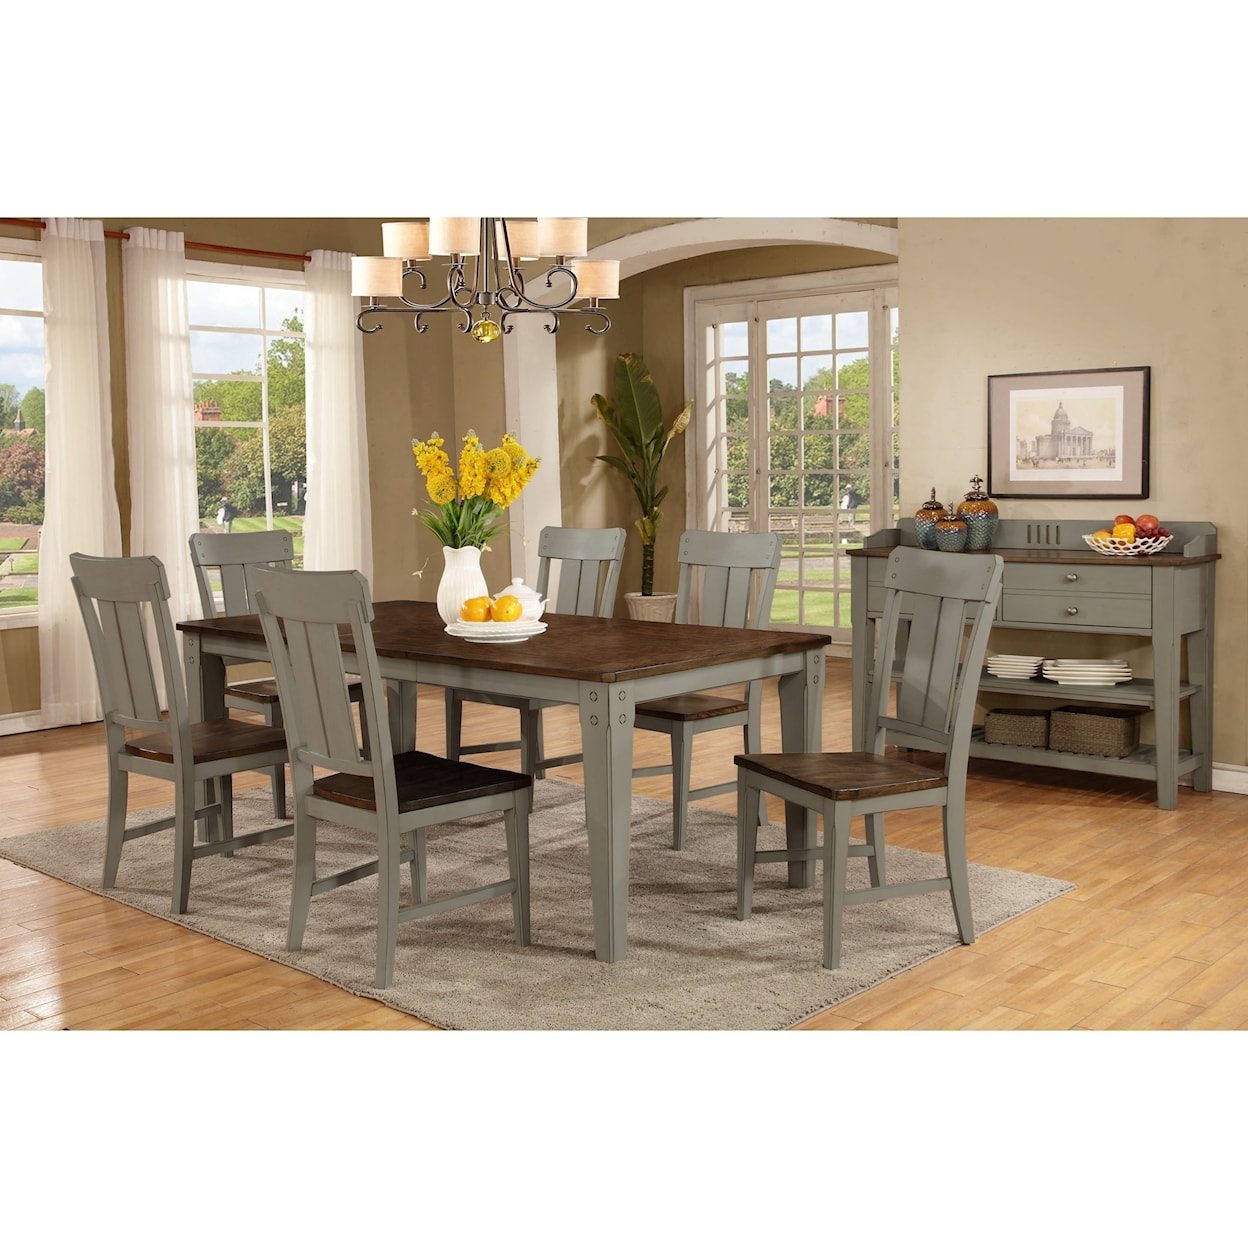 Avalon Furniture Shaker Nouveau Casual Dining Room Group